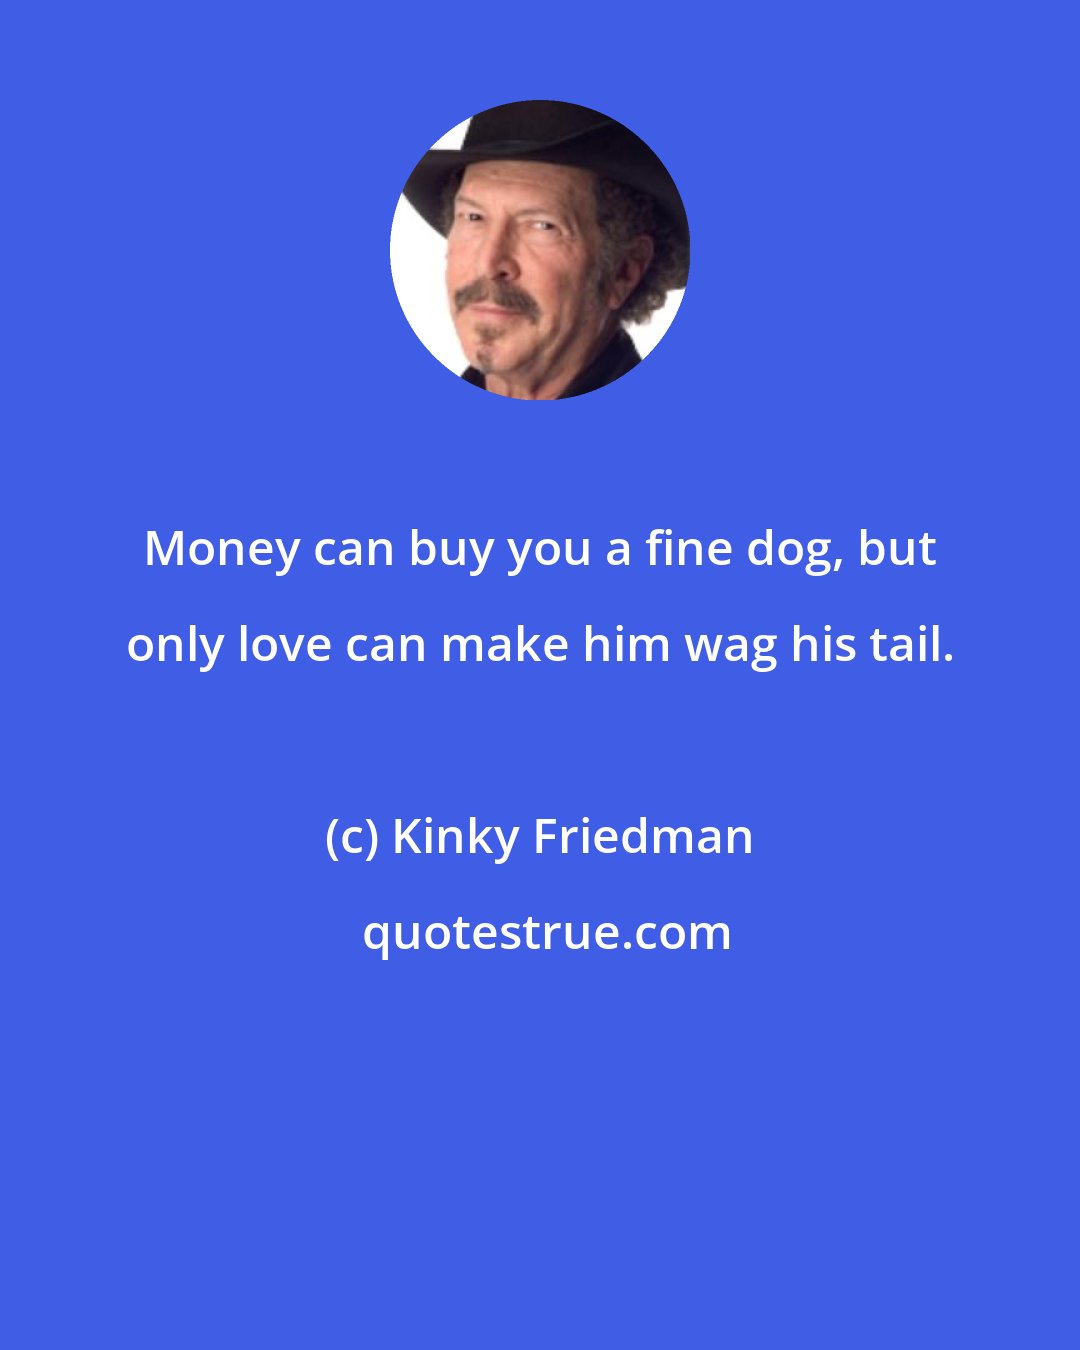 Kinky Friedman: Money can buy you a fine dog, but only love can make him wag his tail.